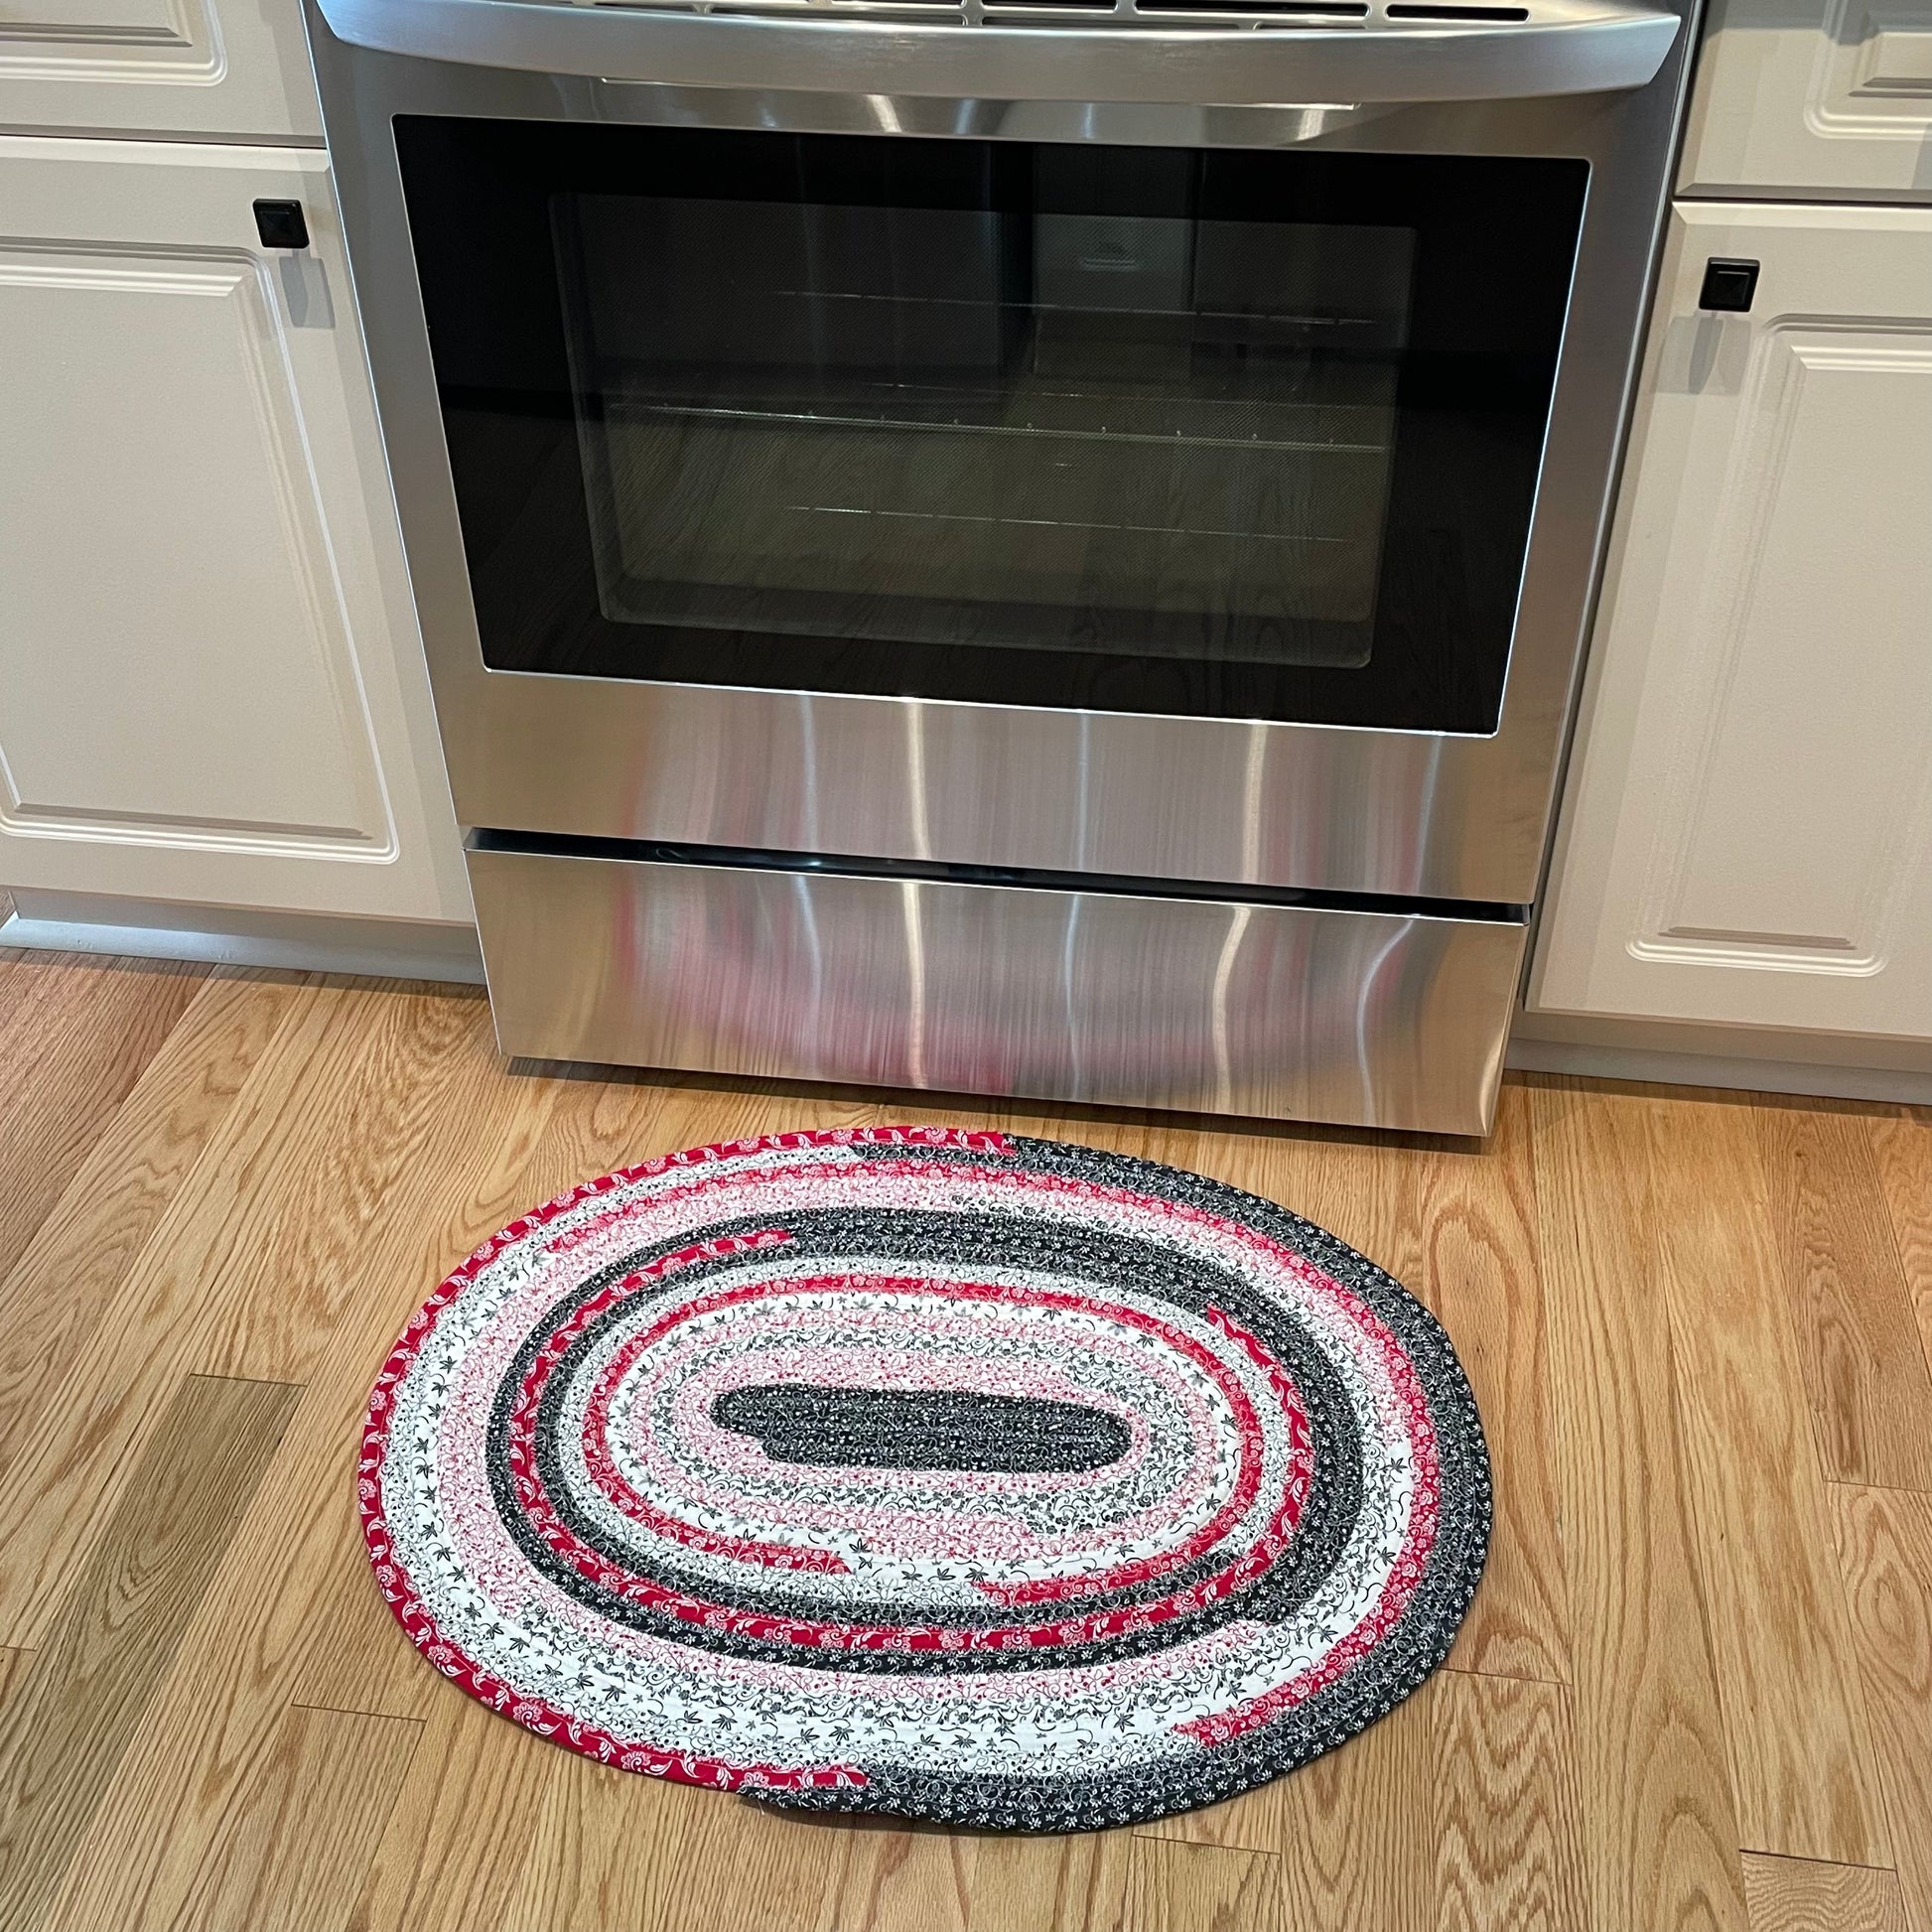 Red white and black flower print rug. Washable kitchen accent rug made with quality quilting cotton and cotton/poly fill. Part of a mix and match collection of coordinated modern farmhouse kitchen decor. Shop the entire catalogue or follow along on the Home Stitchery Decor YouTube Channel.